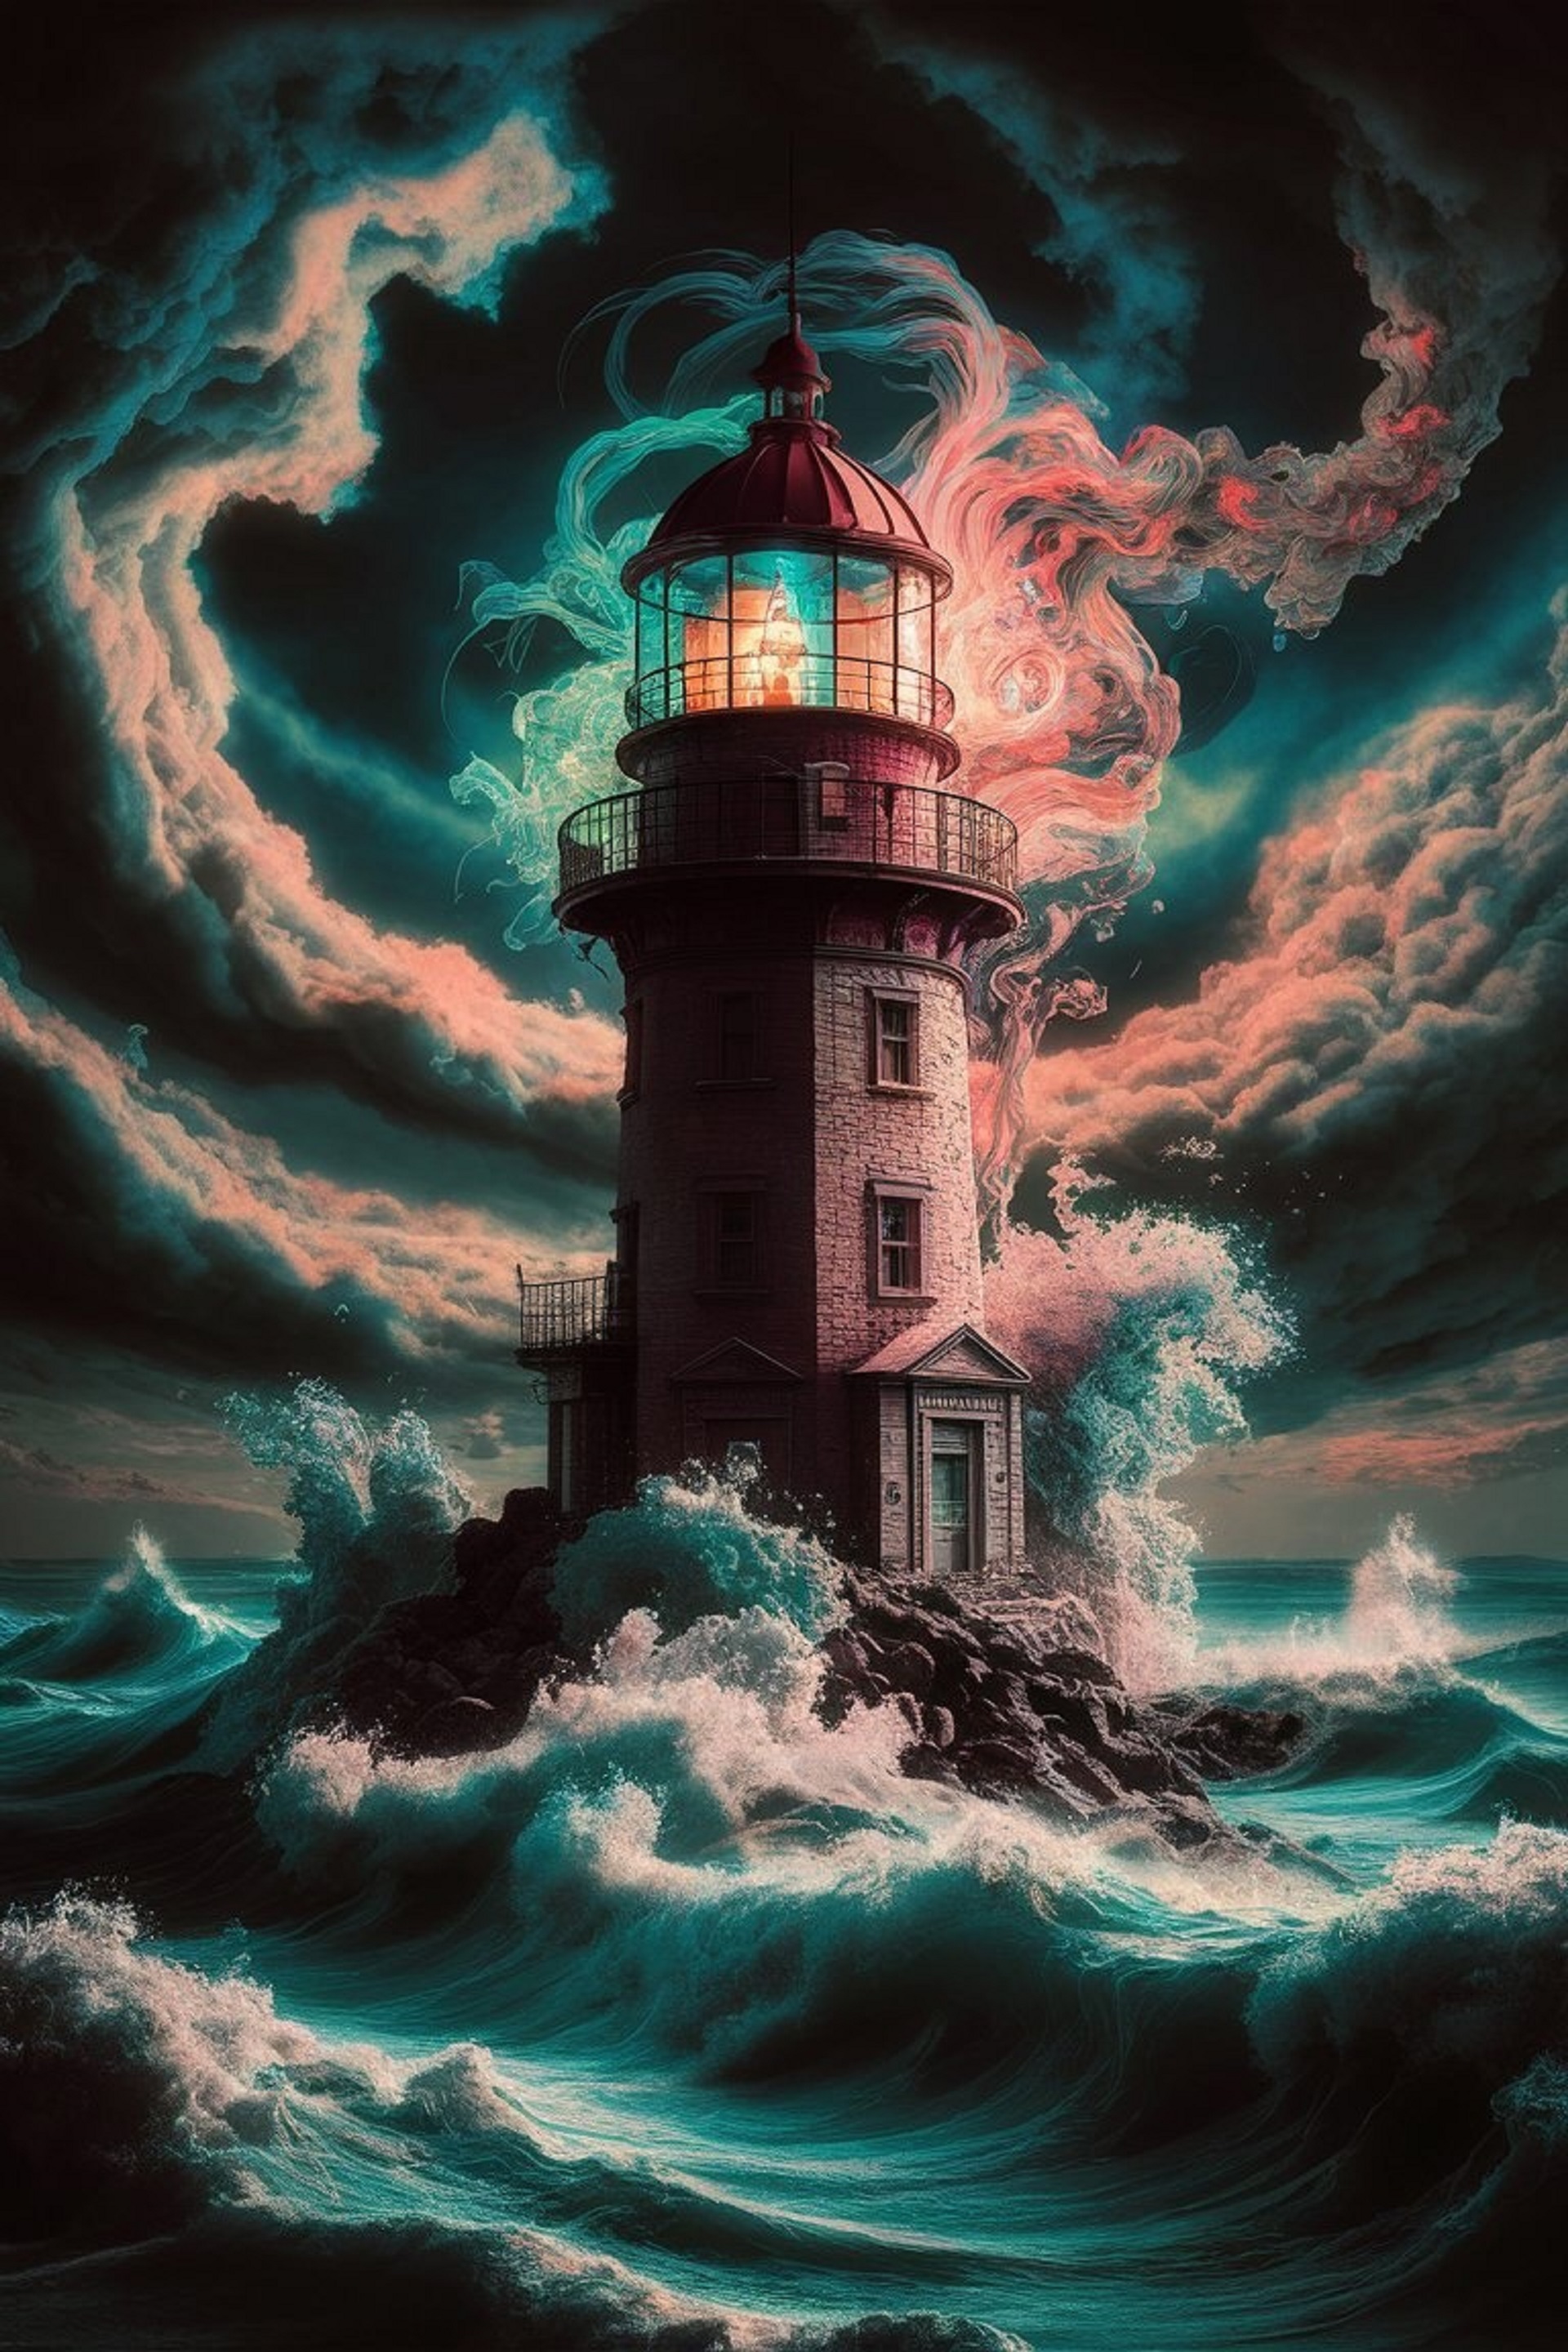 A lighthouse in a storm